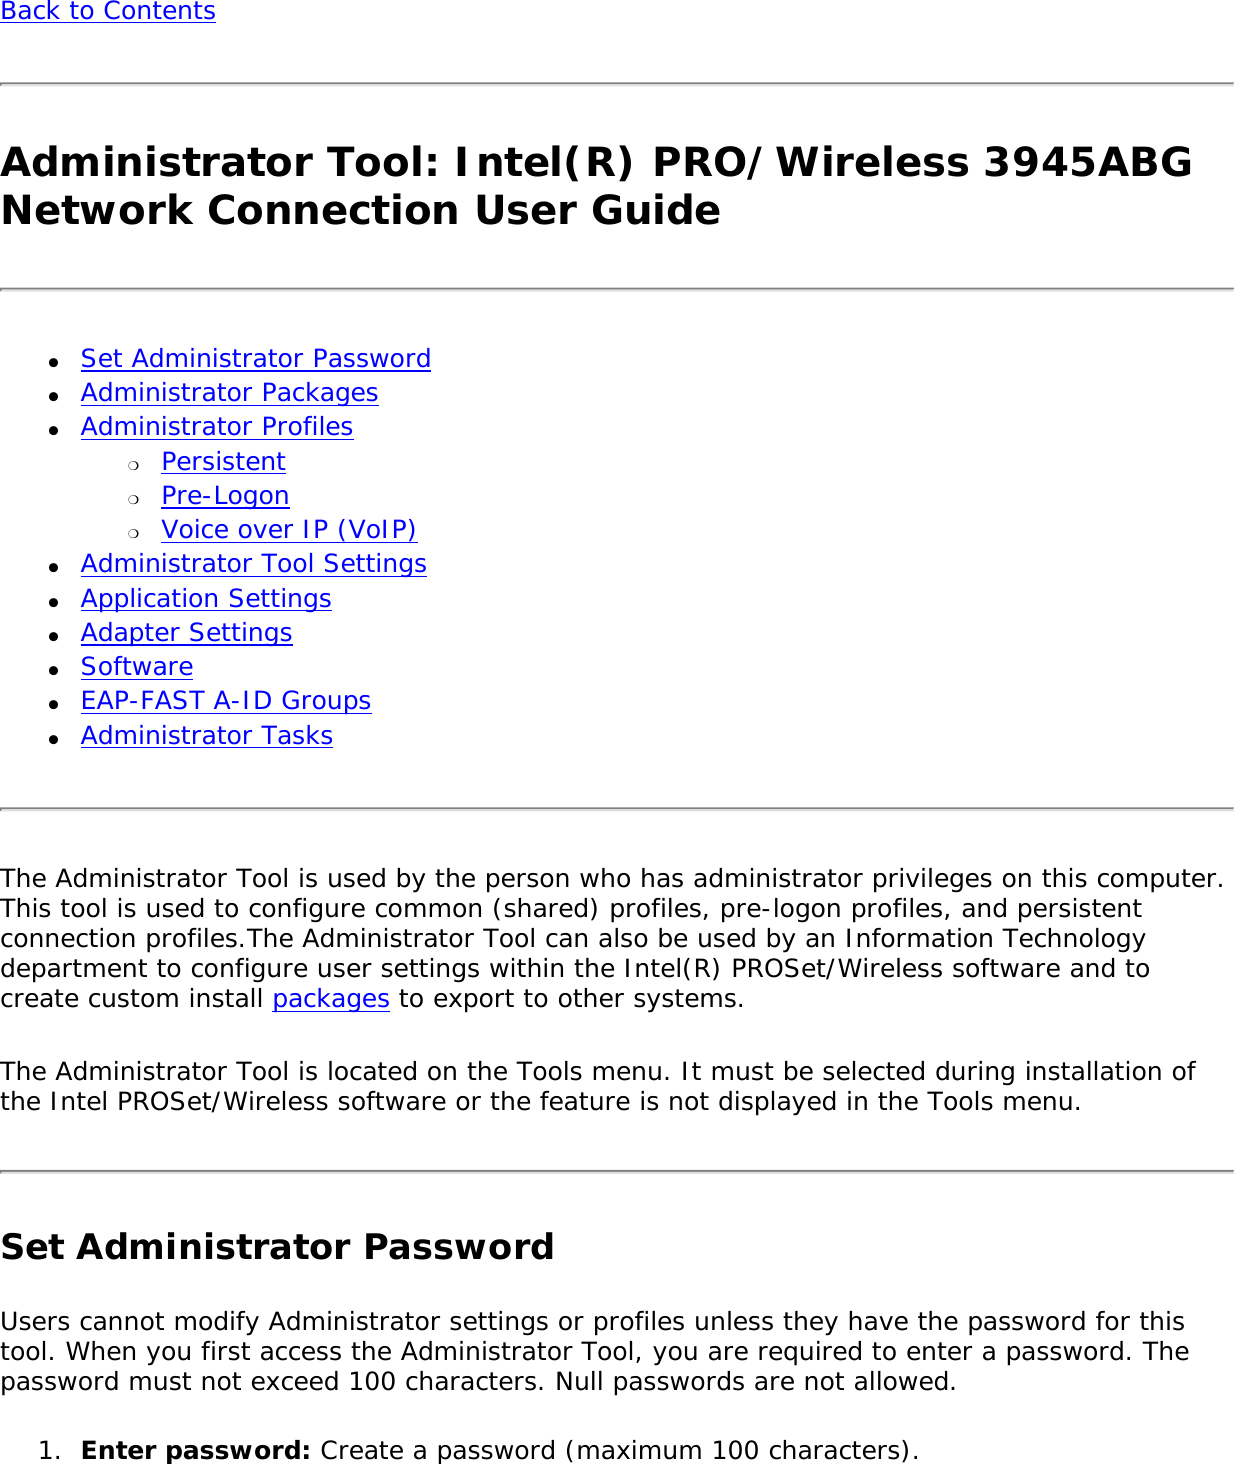 Back to Contents Administrator Tool: Intel(R) PRO/Wireless 3945ABG Network Connection User Guide●     Set Administrator Password ●     Administrator Packages ●     Administrator Profiles ❍     Persistent❍     Pre-Logon❍     Voice over IP (VoIP) ●     Administrator Tool Settings ●     Application Settings ●     Adapter Settings●     Software●     EAP-FAST A-ID Groups●     Administrator TasksThe Administrator Tool is used by the person who has administrator privileges on this computer. This tool is used to configure common (shared) profiles, pre-logon profiles, and persistent connection profiles.The Administrator Tool can also be used by an Information Technology department to configure user settings within the Intel(R) PROSet/Wireless software and to create custom install packages to export to other systems. The Administrator Tool is located on the Tools menu. It must be selected during installation of the Intel PROSet/Wireless software or the feature is not displayed in the Tools menu. Set Administrator Password Users cannot modify Administrator settings or profiles unless they have the password for this tool. When you first access the Administrator Tool, you are required to enter a password. The password must not exceed 100 characters. Null passwords are not allowed. 1.  Enter password: Create a password (maximum 100 characters). 